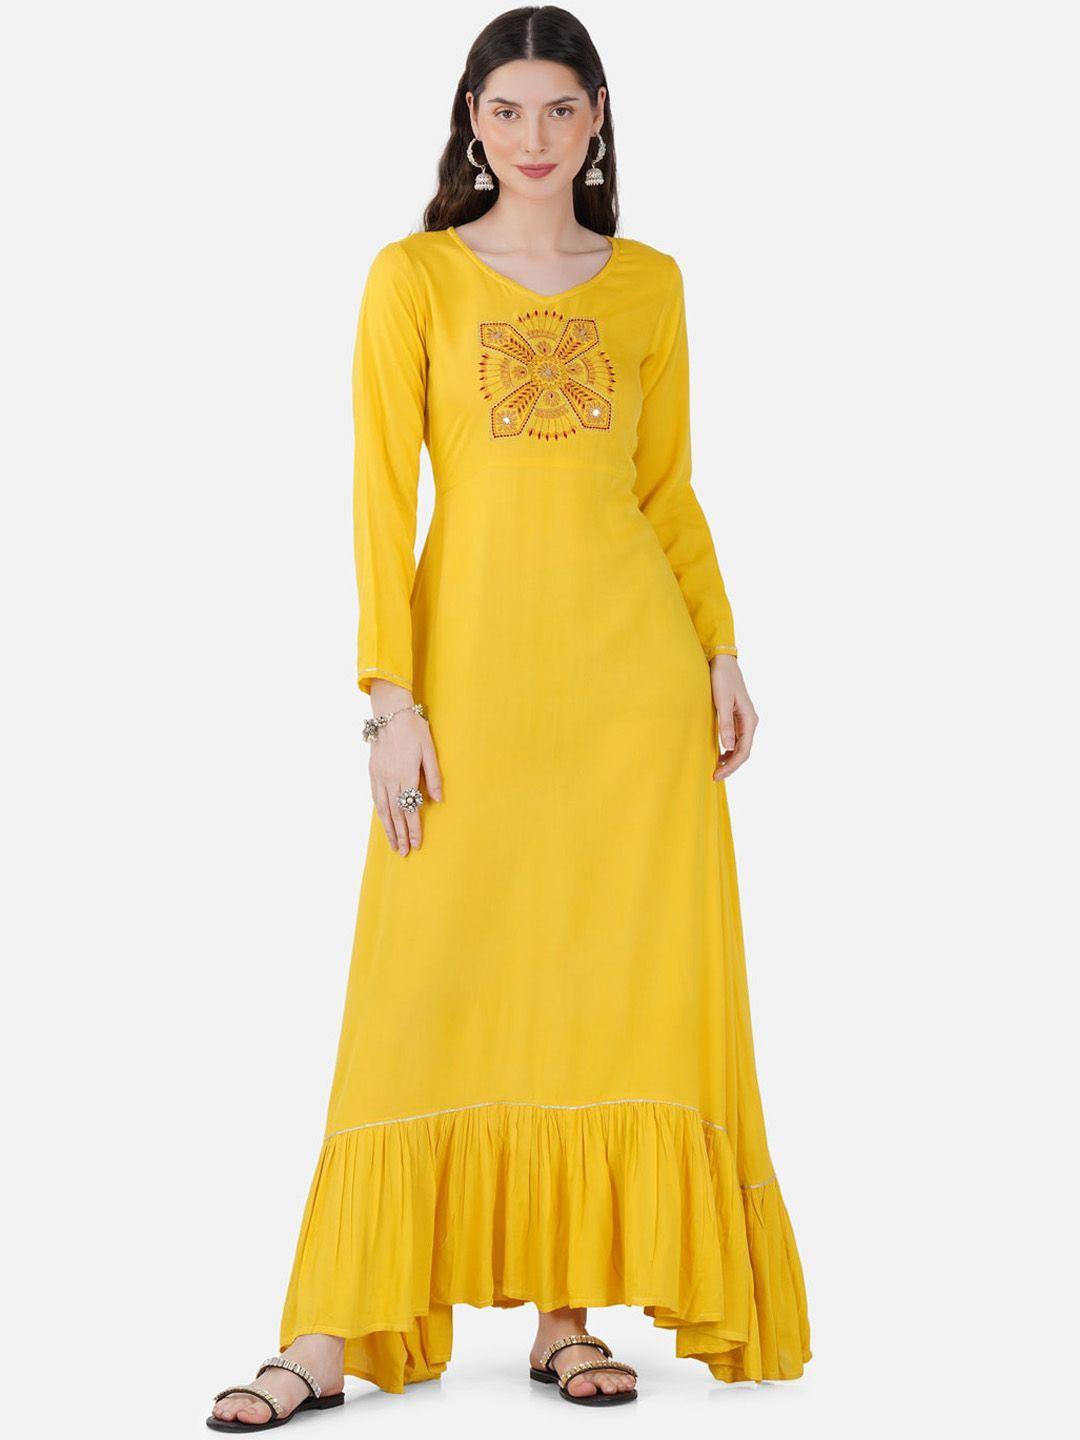 metro-fashion embroidered a-line ethnic dress